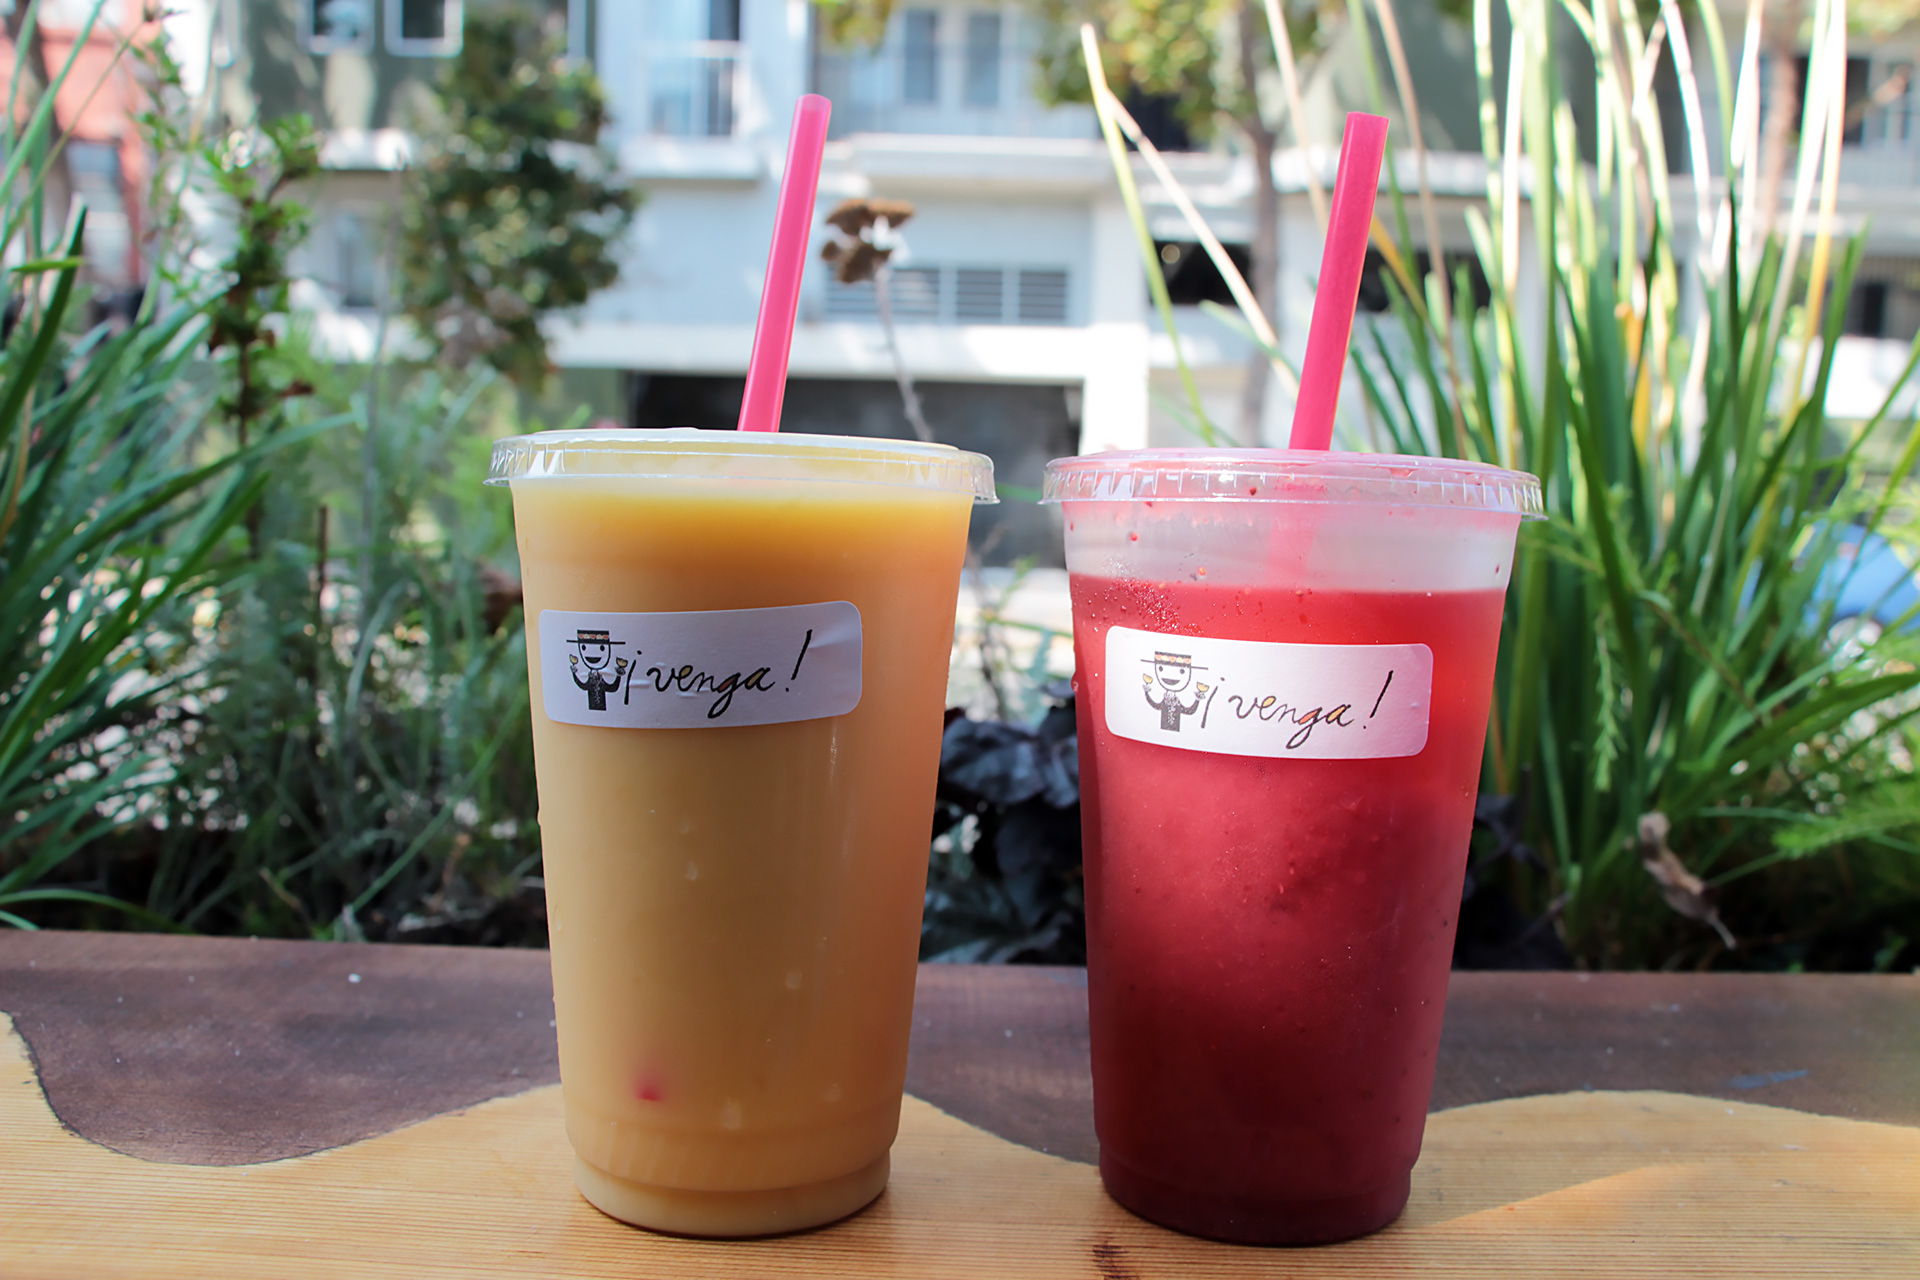 Homemade fruit drinks (mango and strawberry) are excellent accompaniments.